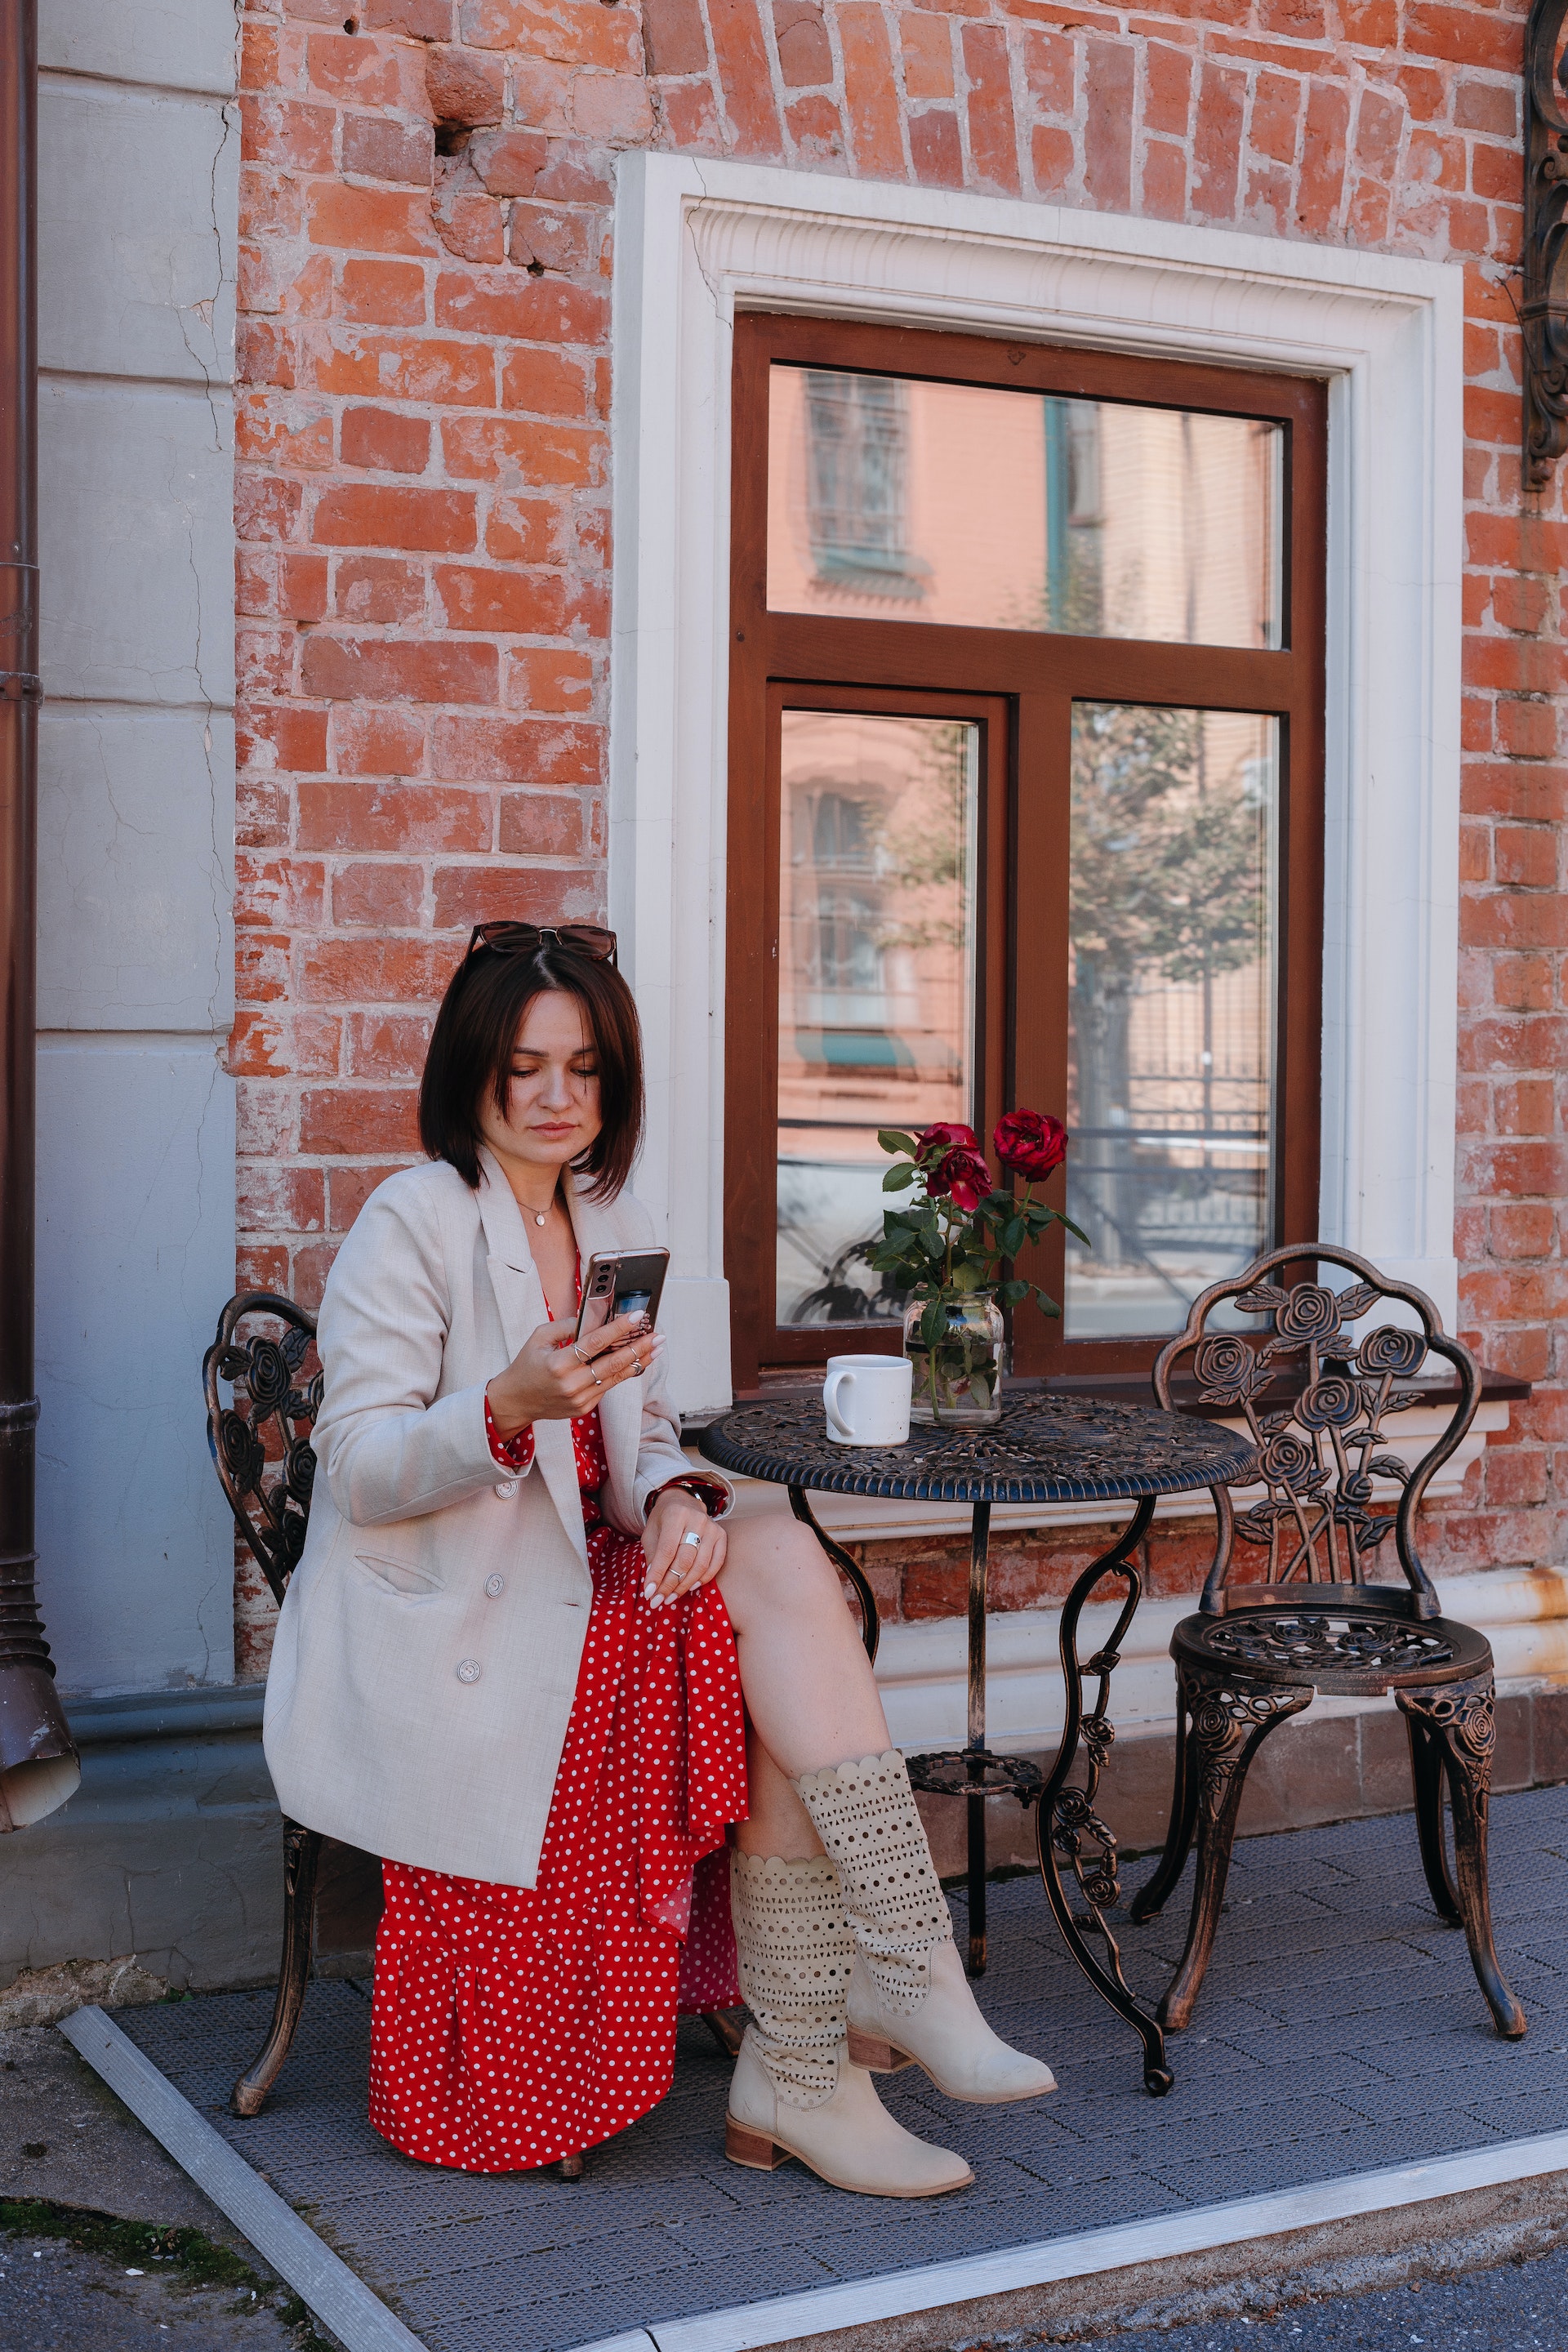 A woman sitting at a sidewalk cafe while checking her mobile phone | Source: Pexels